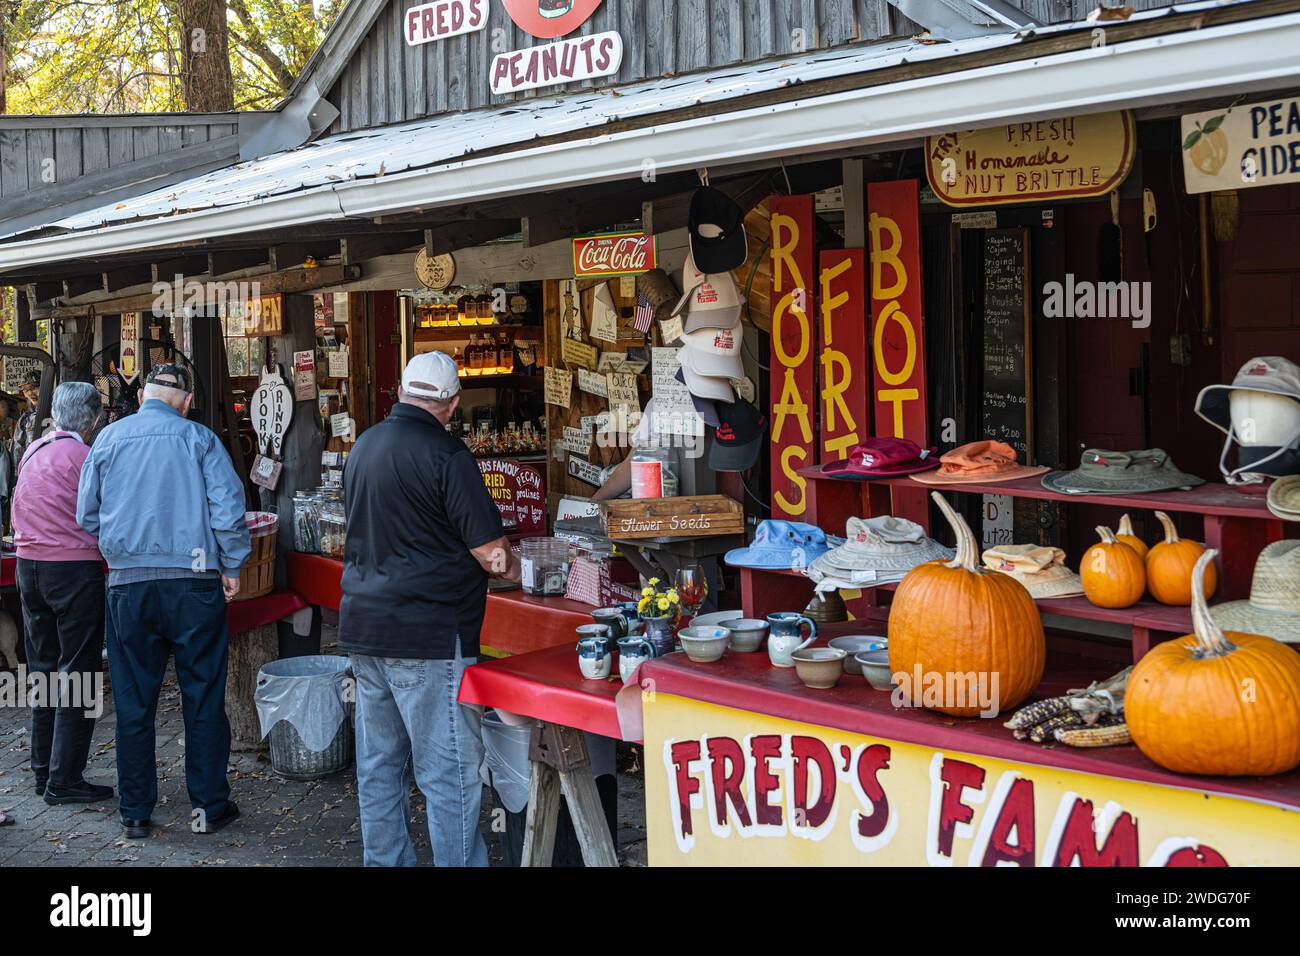 Fred's Famous Peanuts roadside stand in Helen, Georgia, offers fried, roasted, and boiled peanuts along with ciders, jellies, jams and pork rinds. Stock Photo